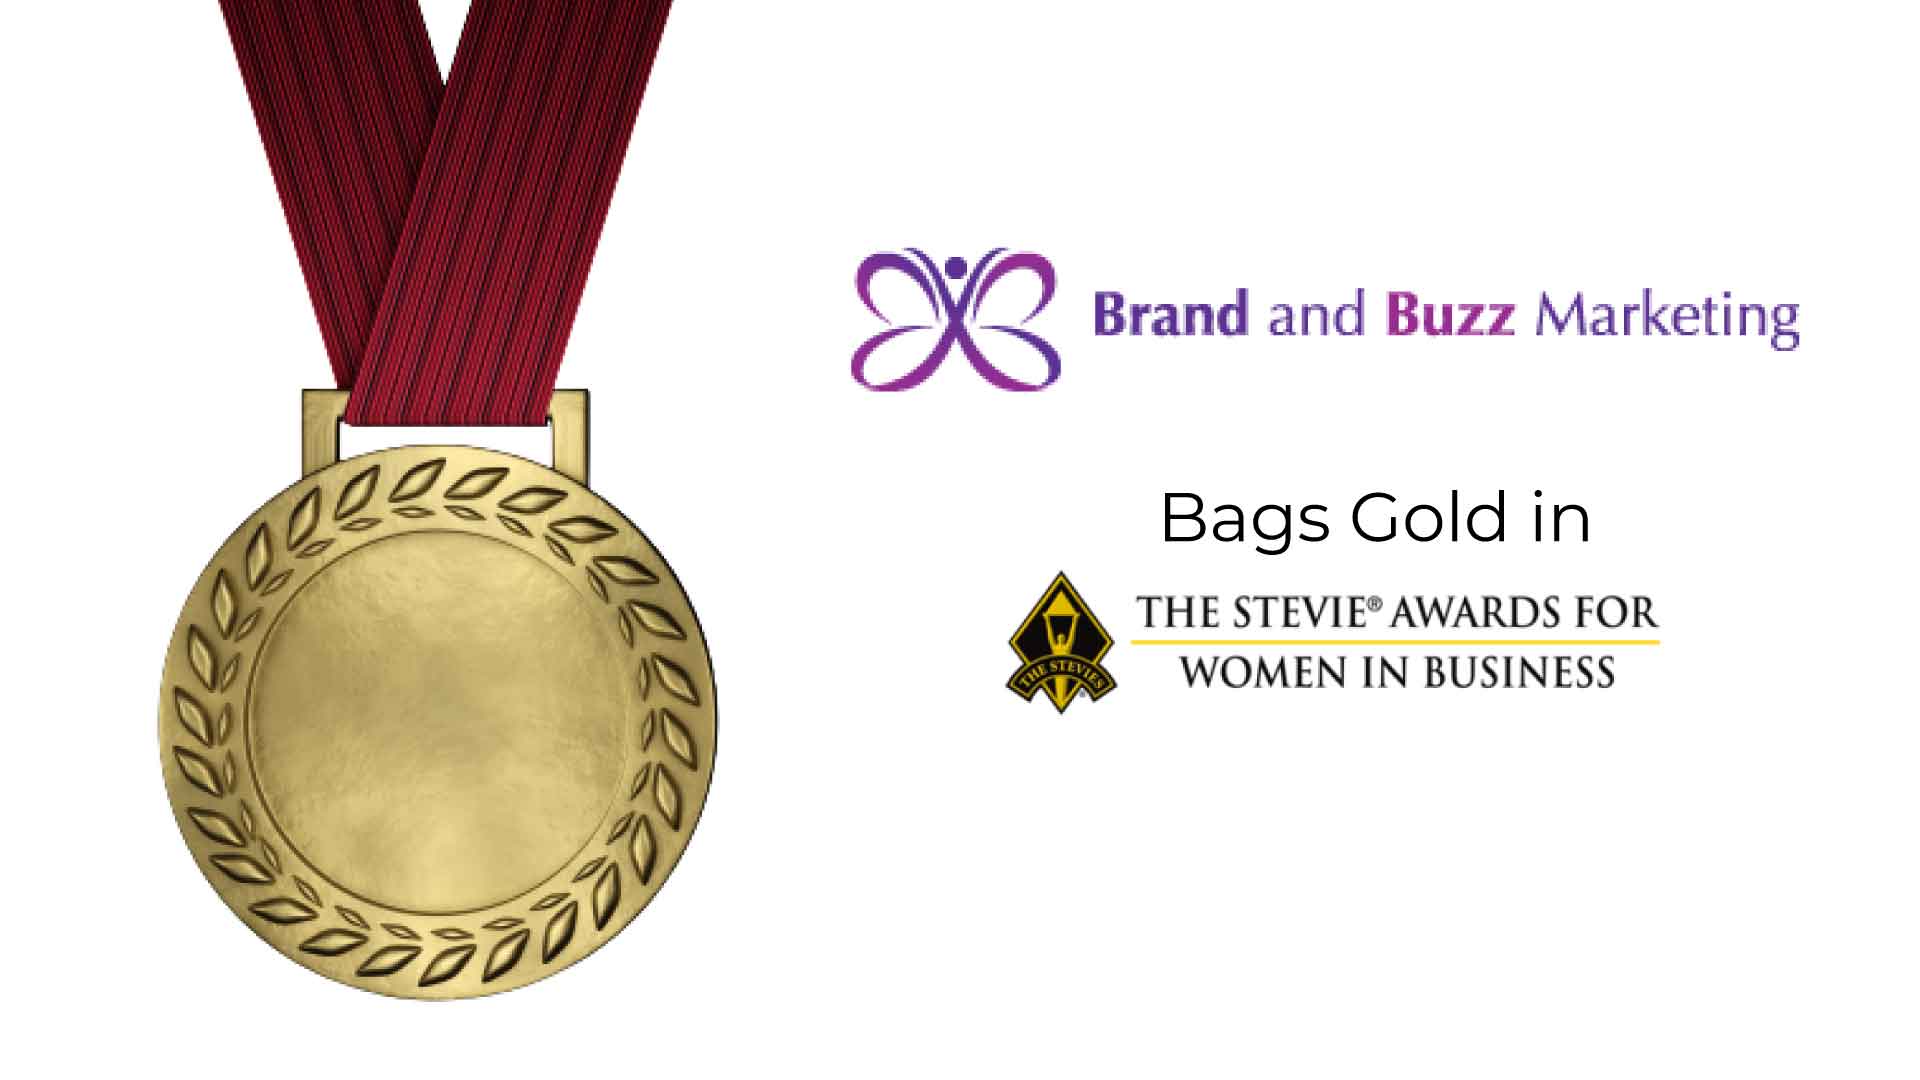 Brand and Buzz Marketing Wins Gold Stevie Award in Thought Leadership